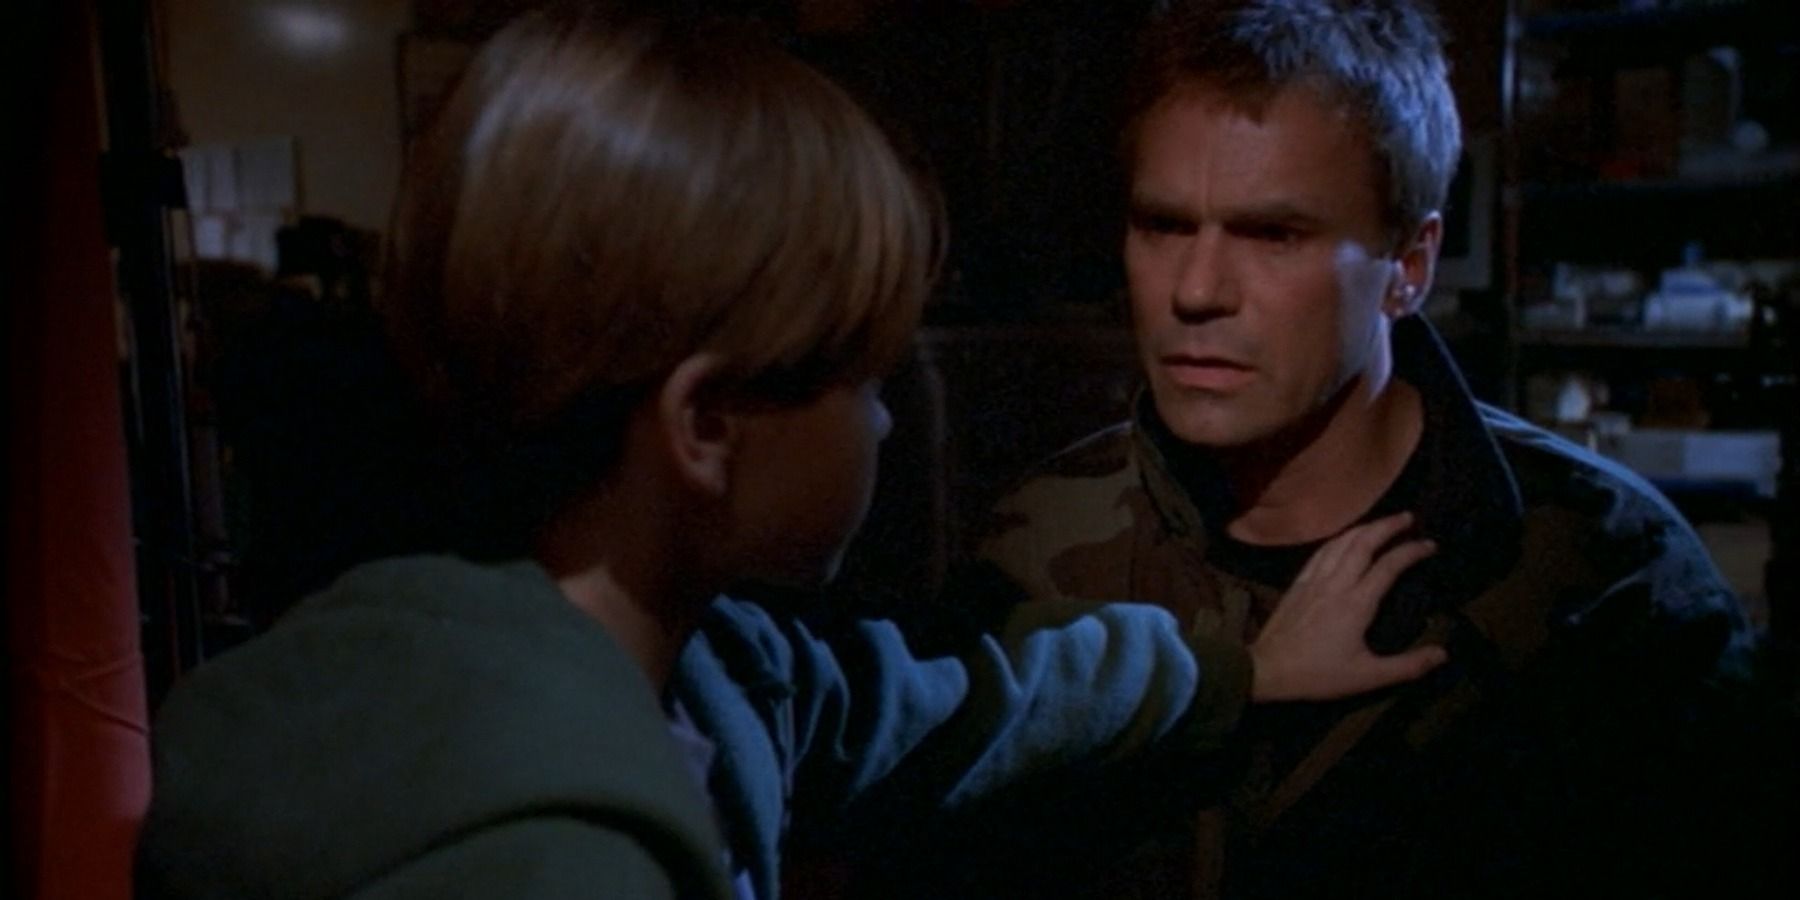 how does stargate sg-1 handle grief?1